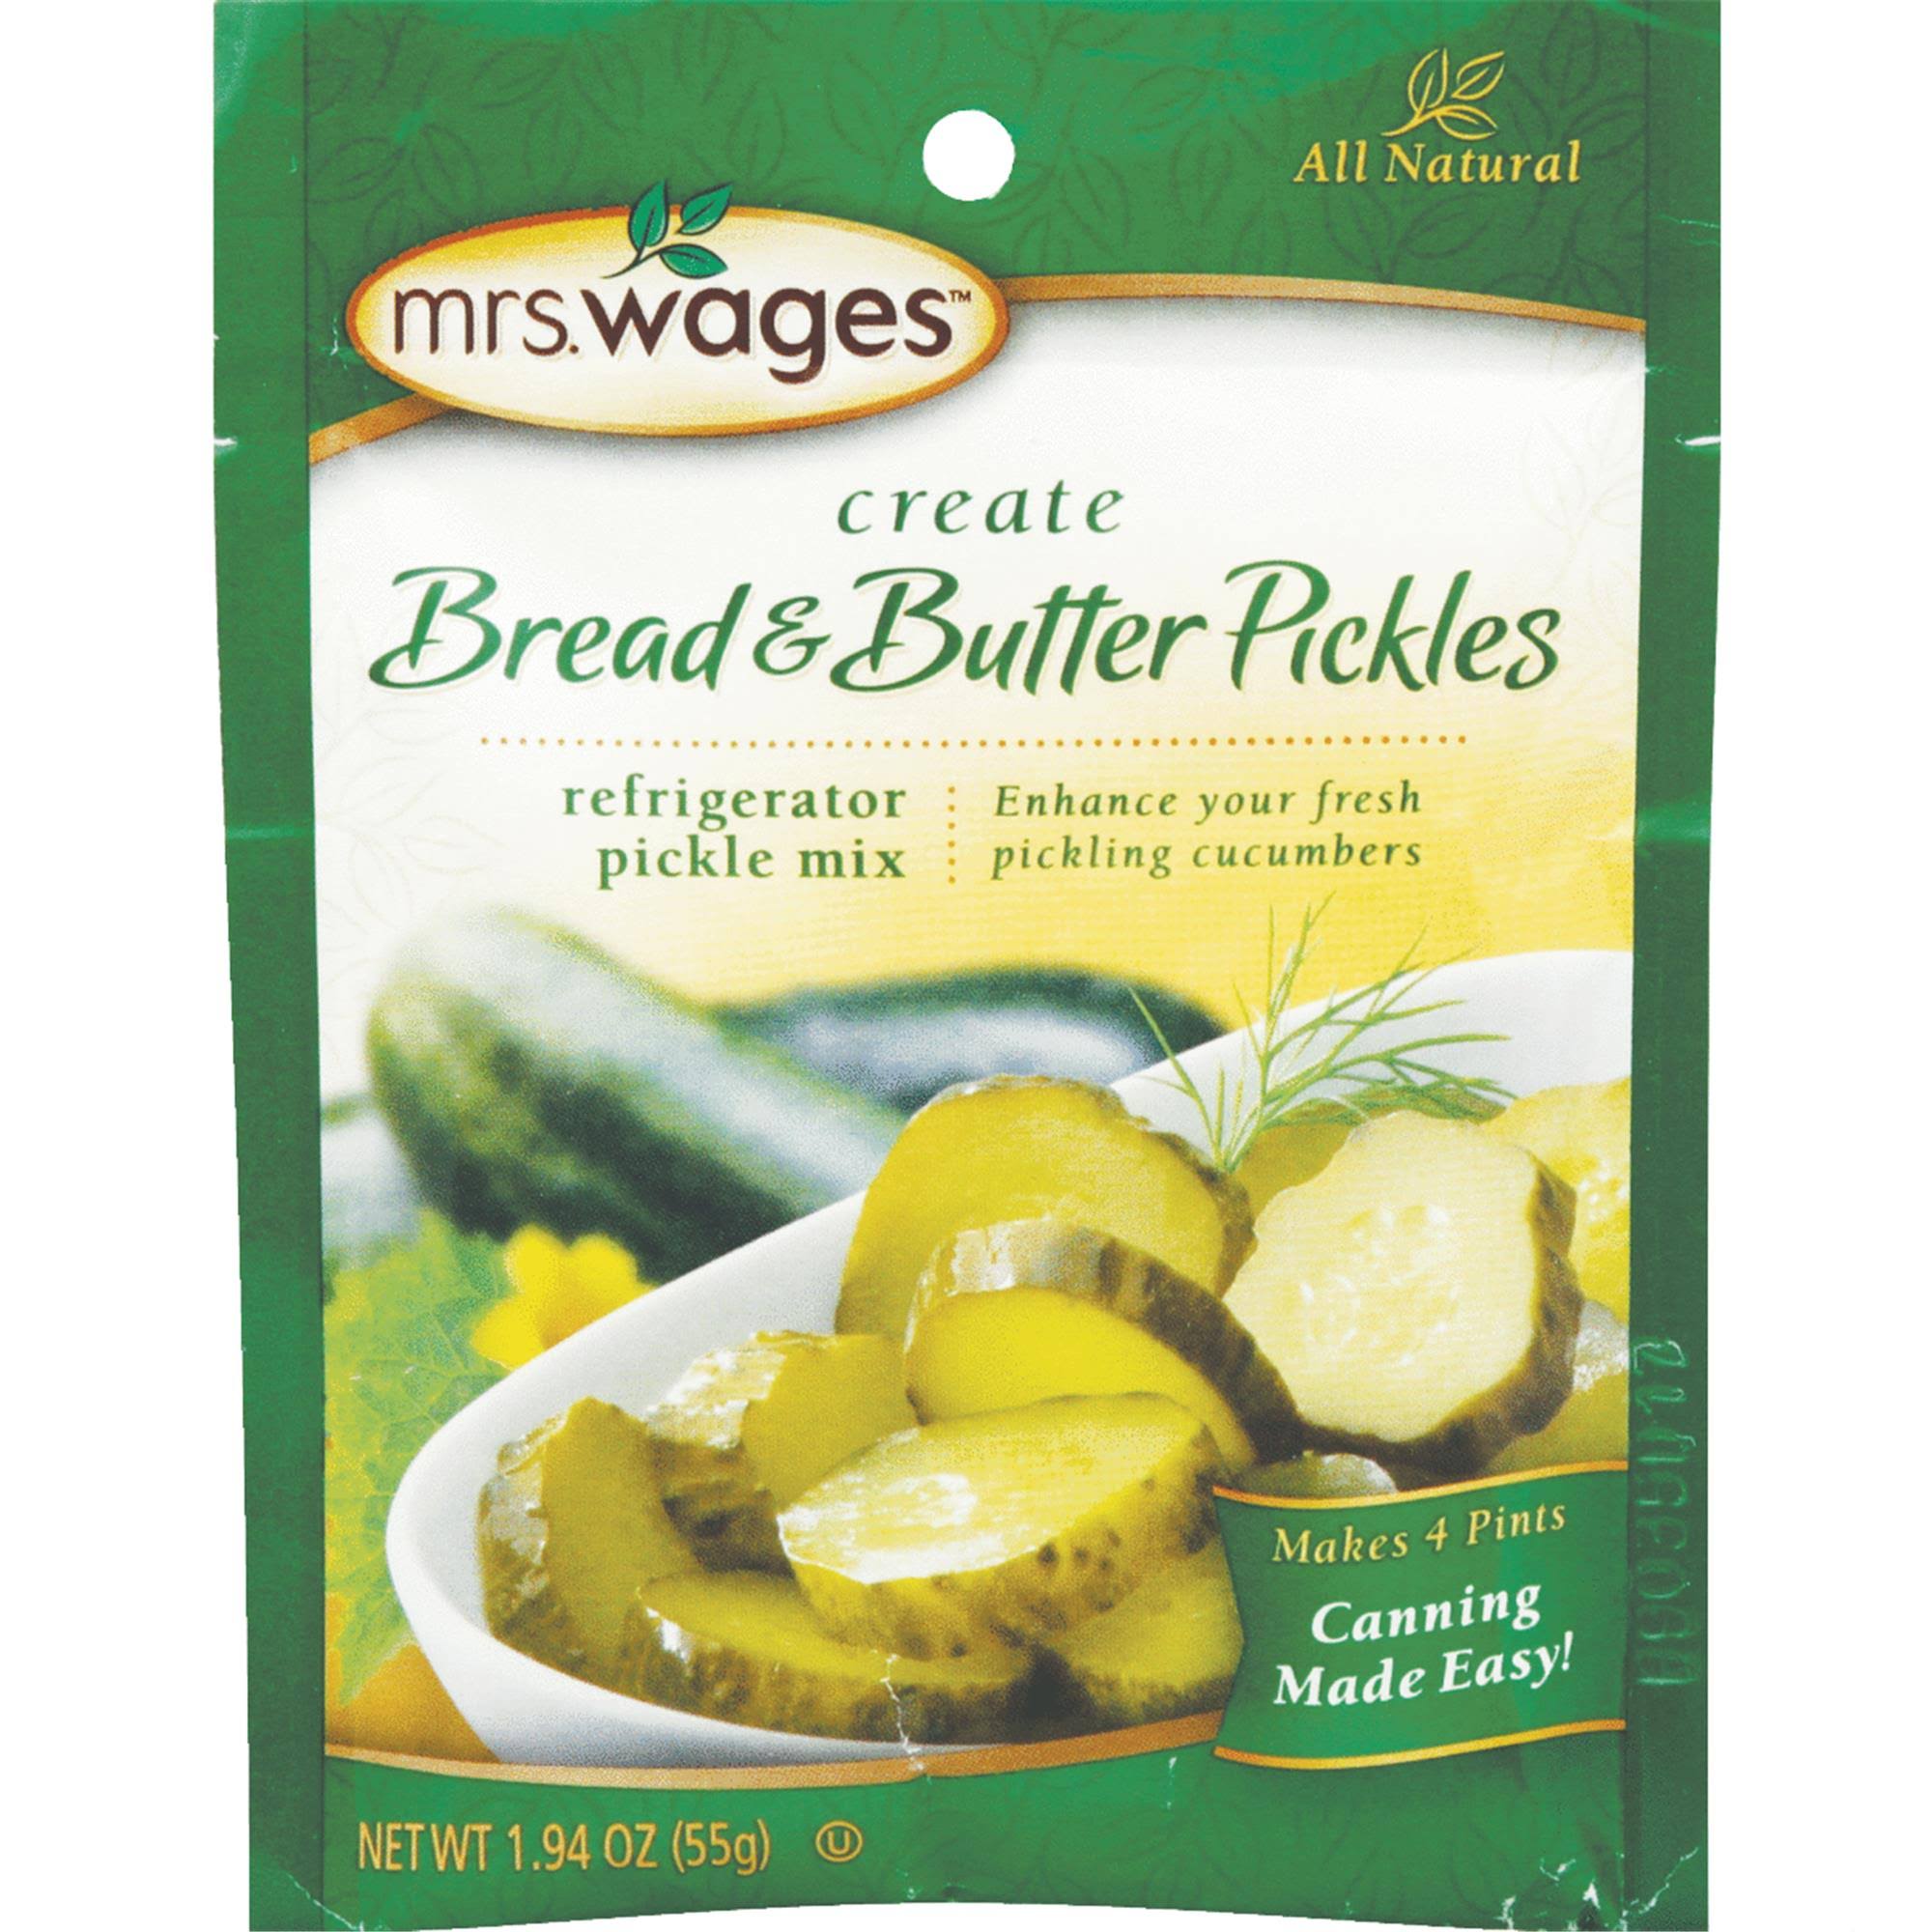 Mrs. Wages Bread and Butter Refrigerator Pickle Mix